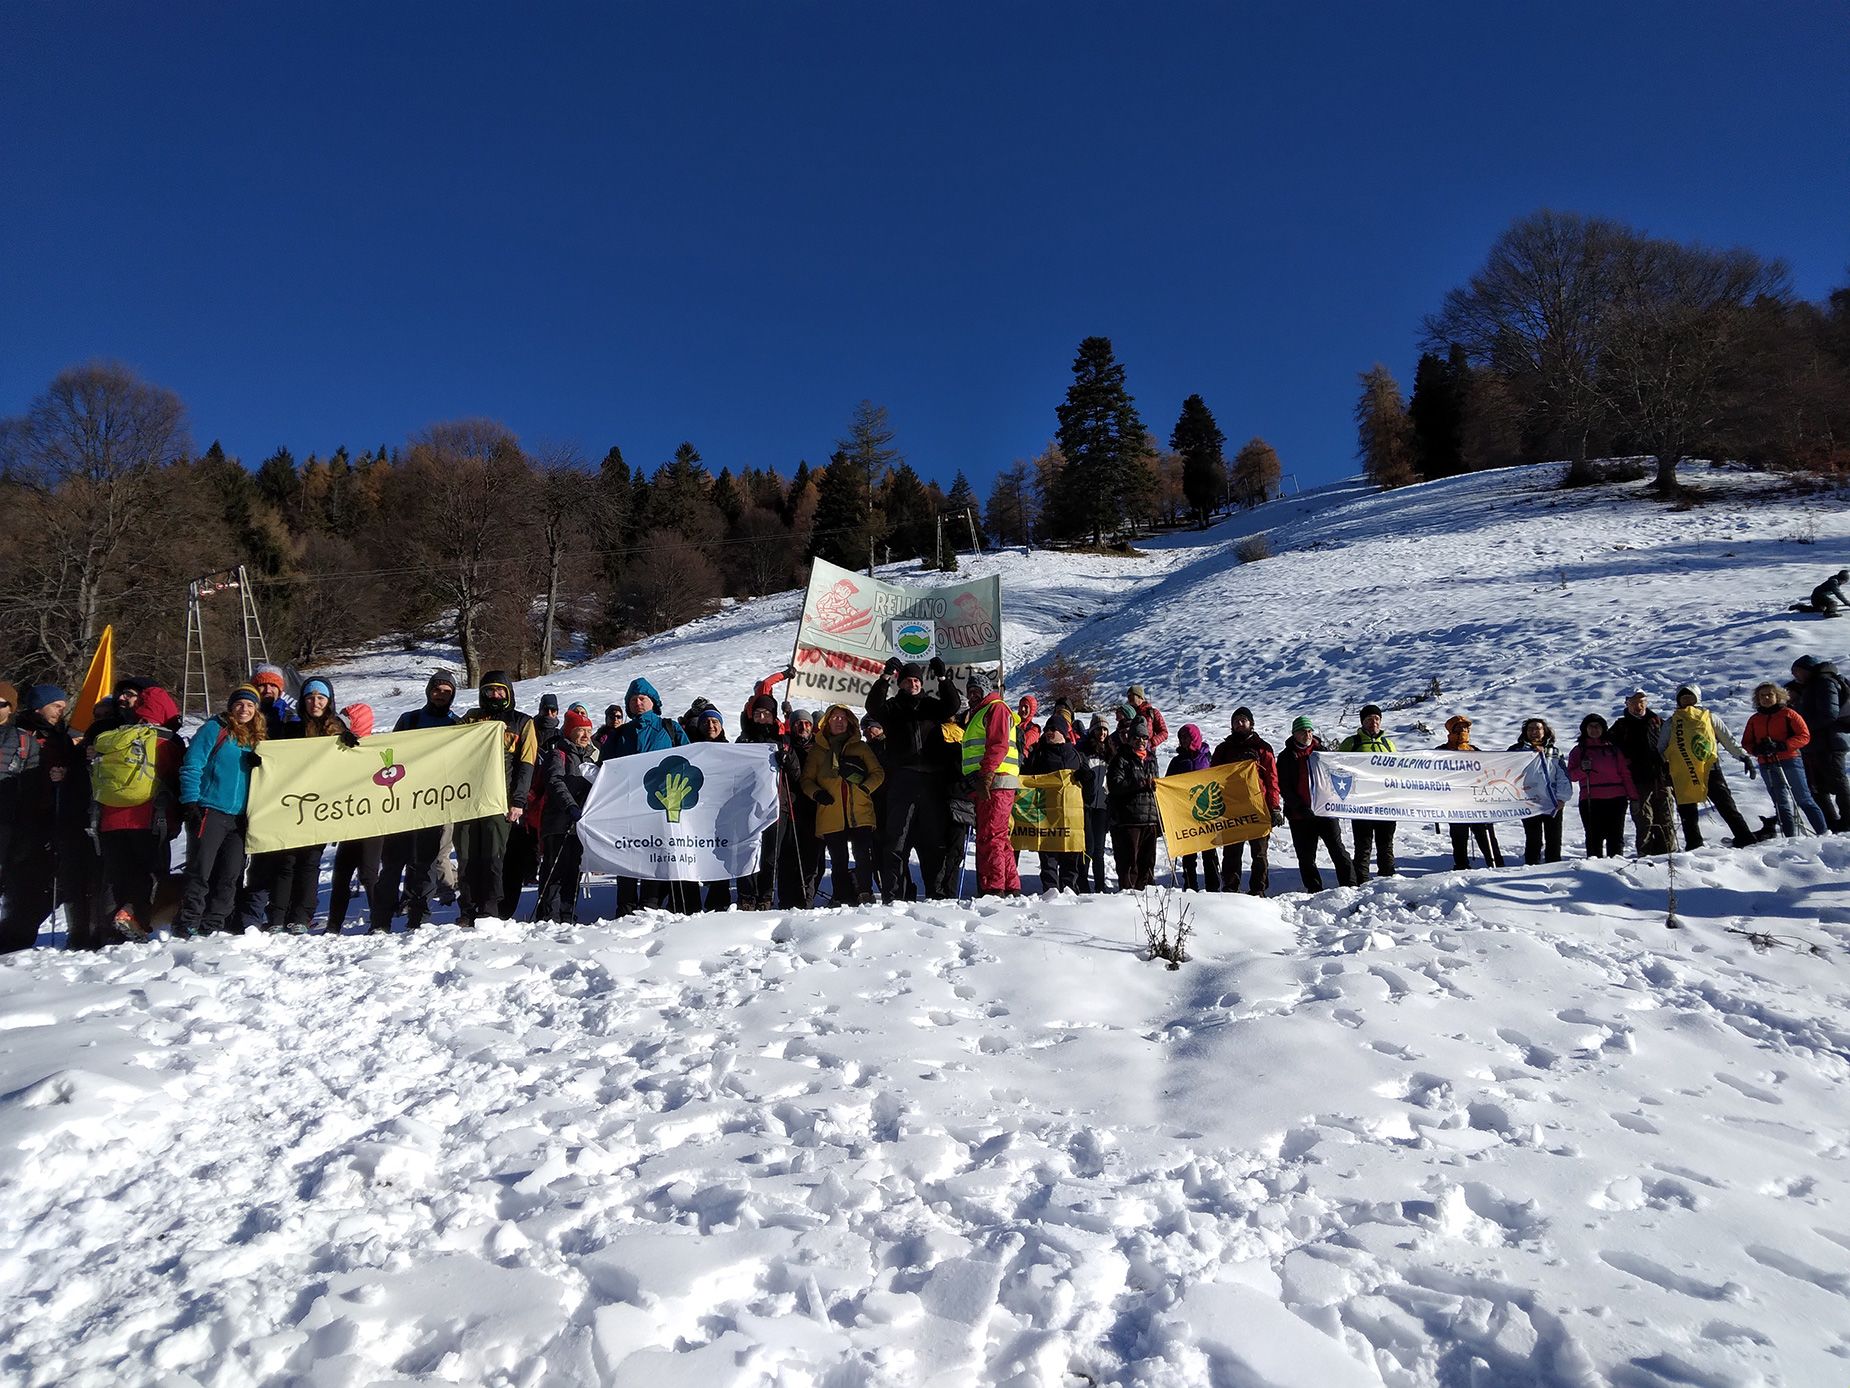 Protesters gathered on the mountain in 2022, following what they say was the season's only significant snowfall.